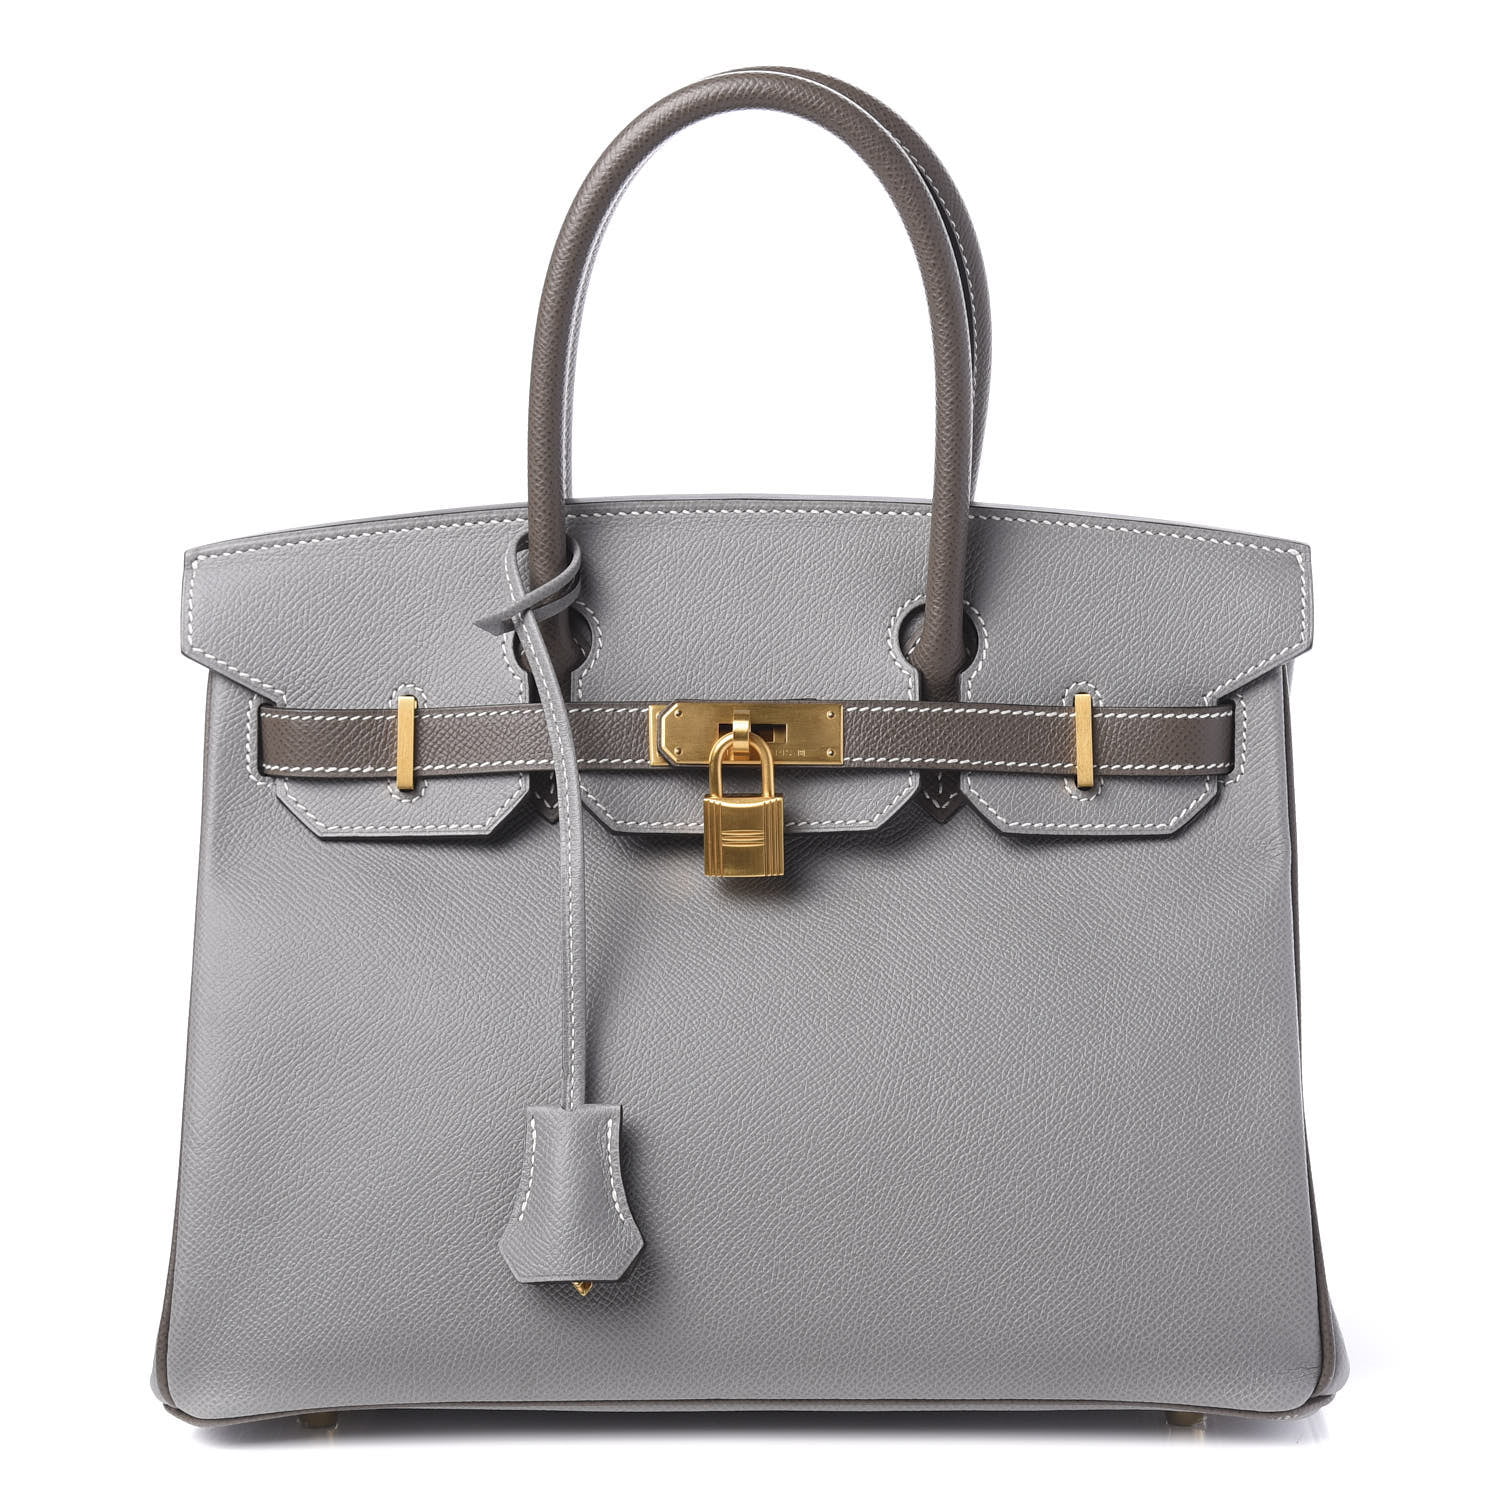 Dear PurseBop: How Specific Should I Be When Requesting an Hermès